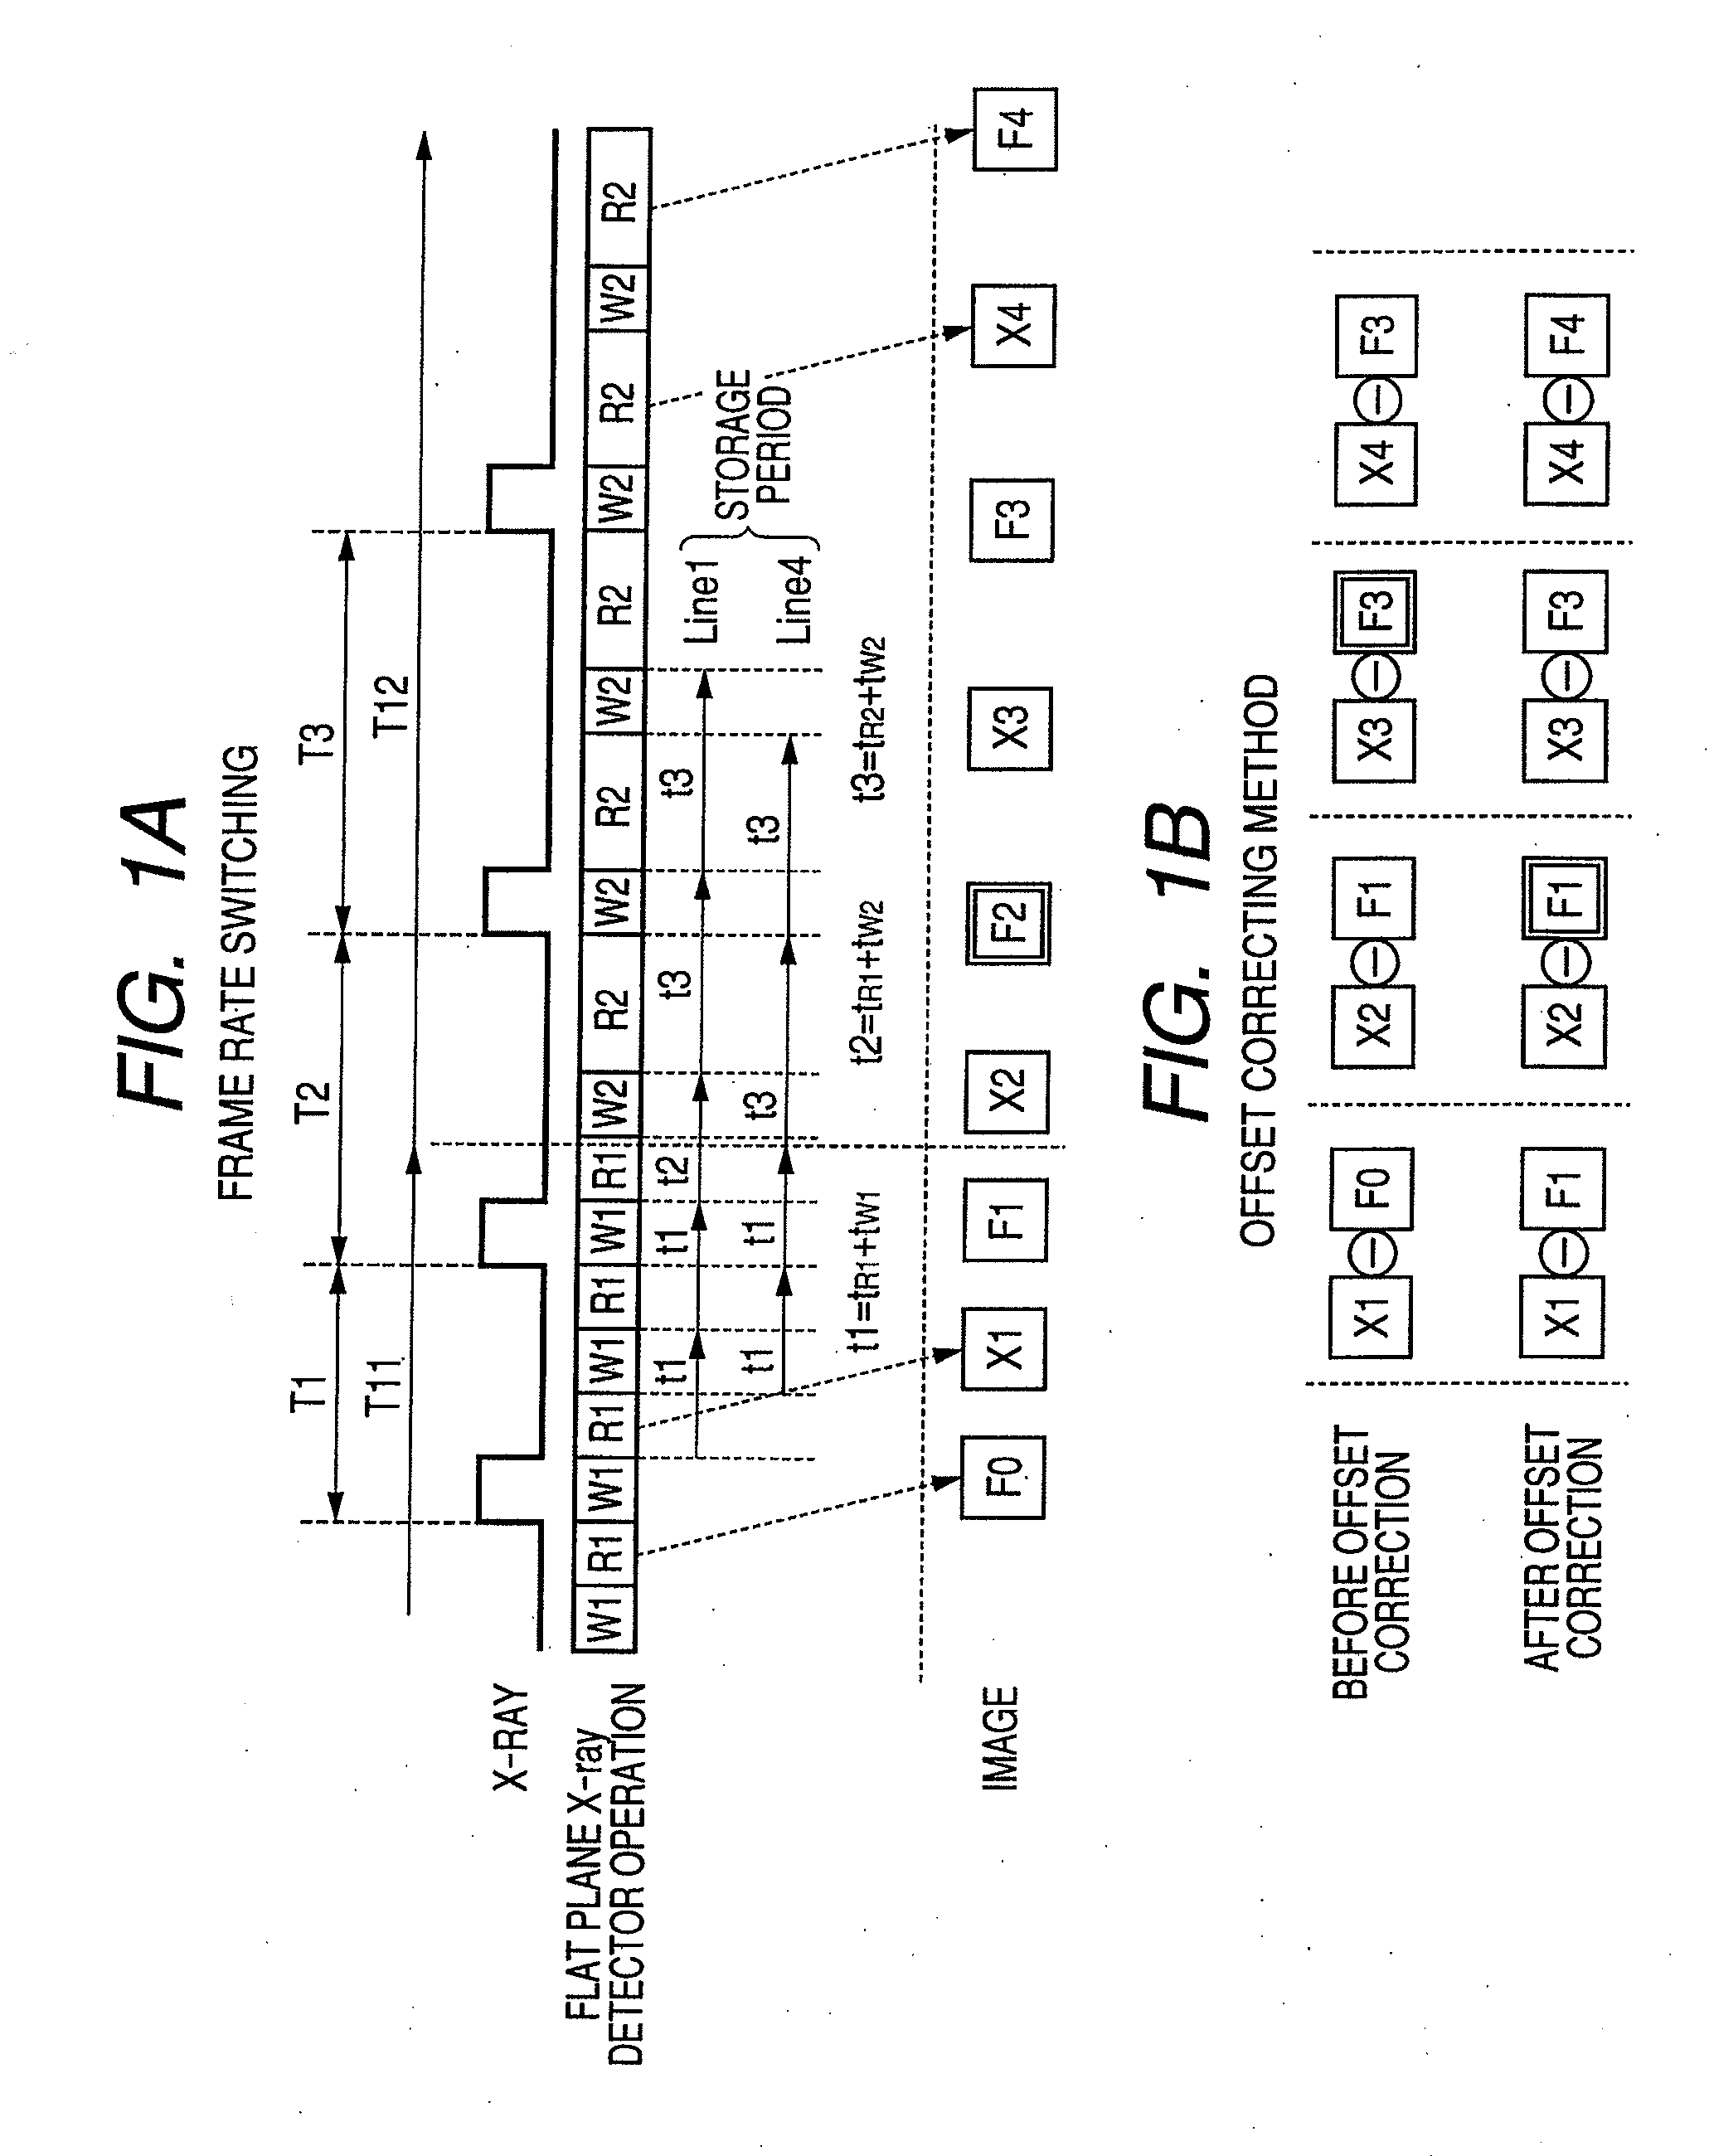 Radiation imaging apparatus, method of controlling the same, and radiation imaging system